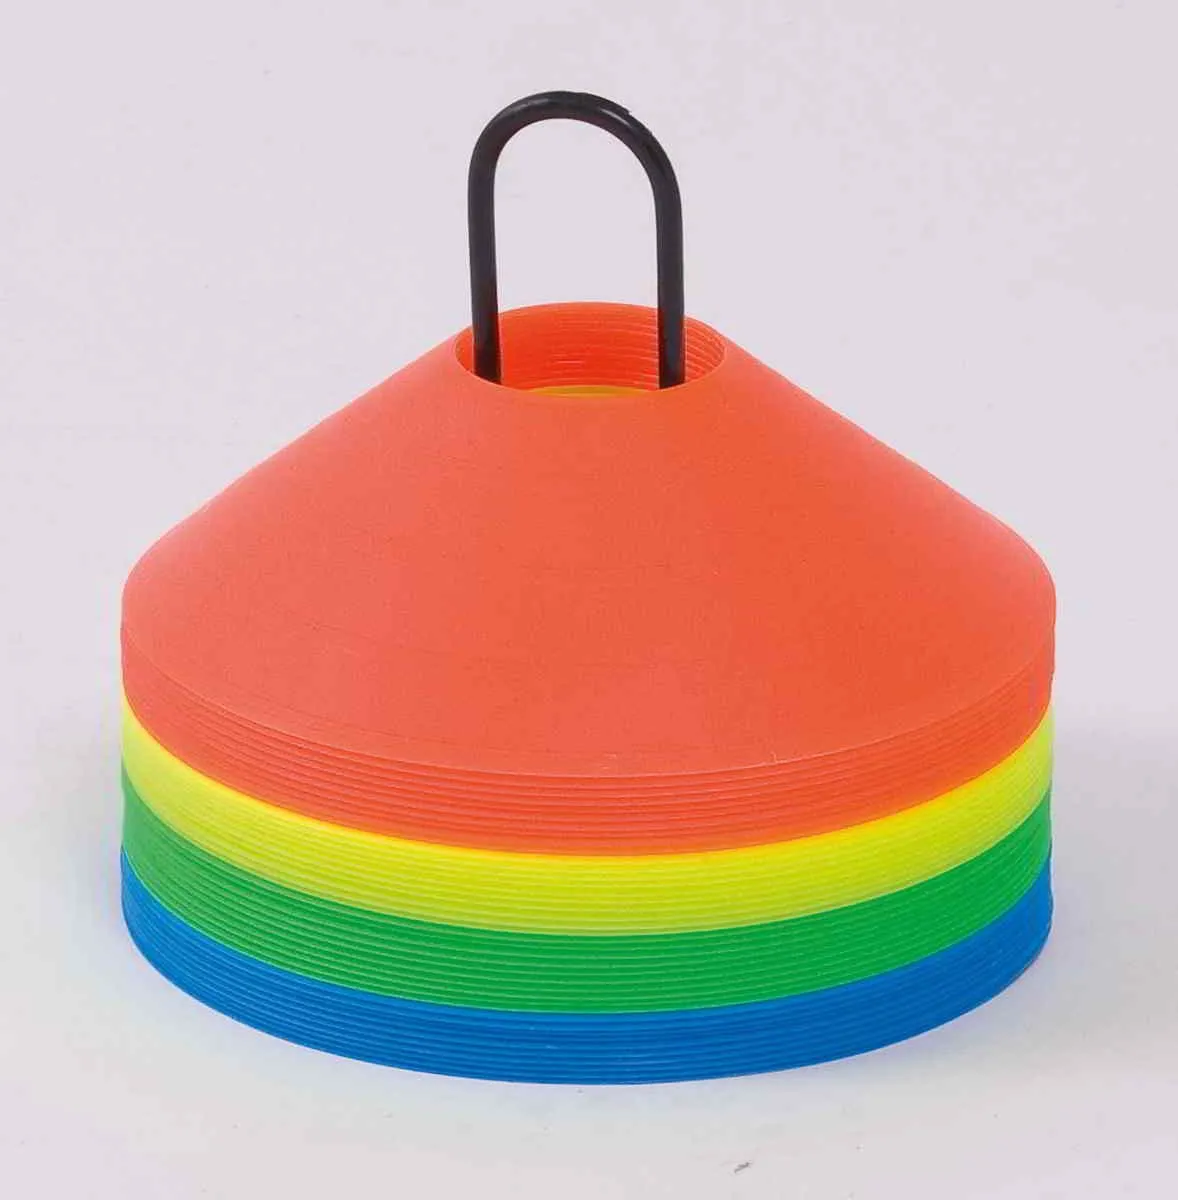 Marking cone set 40 pieces red, yellow, green, blue